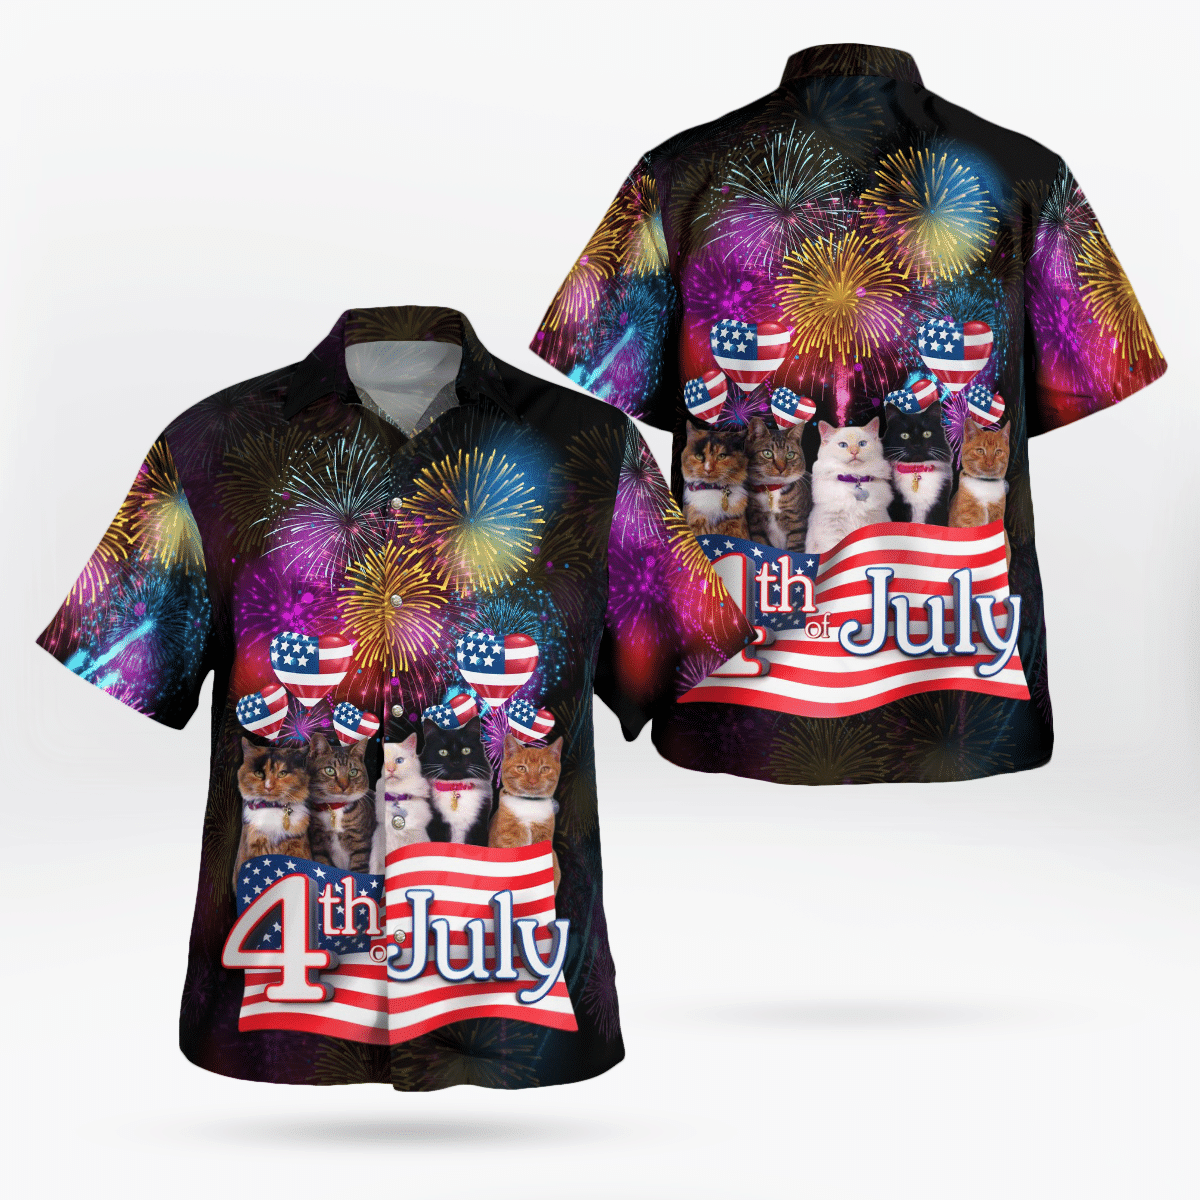 HOT Cats 4th of July Tropical Shirt2